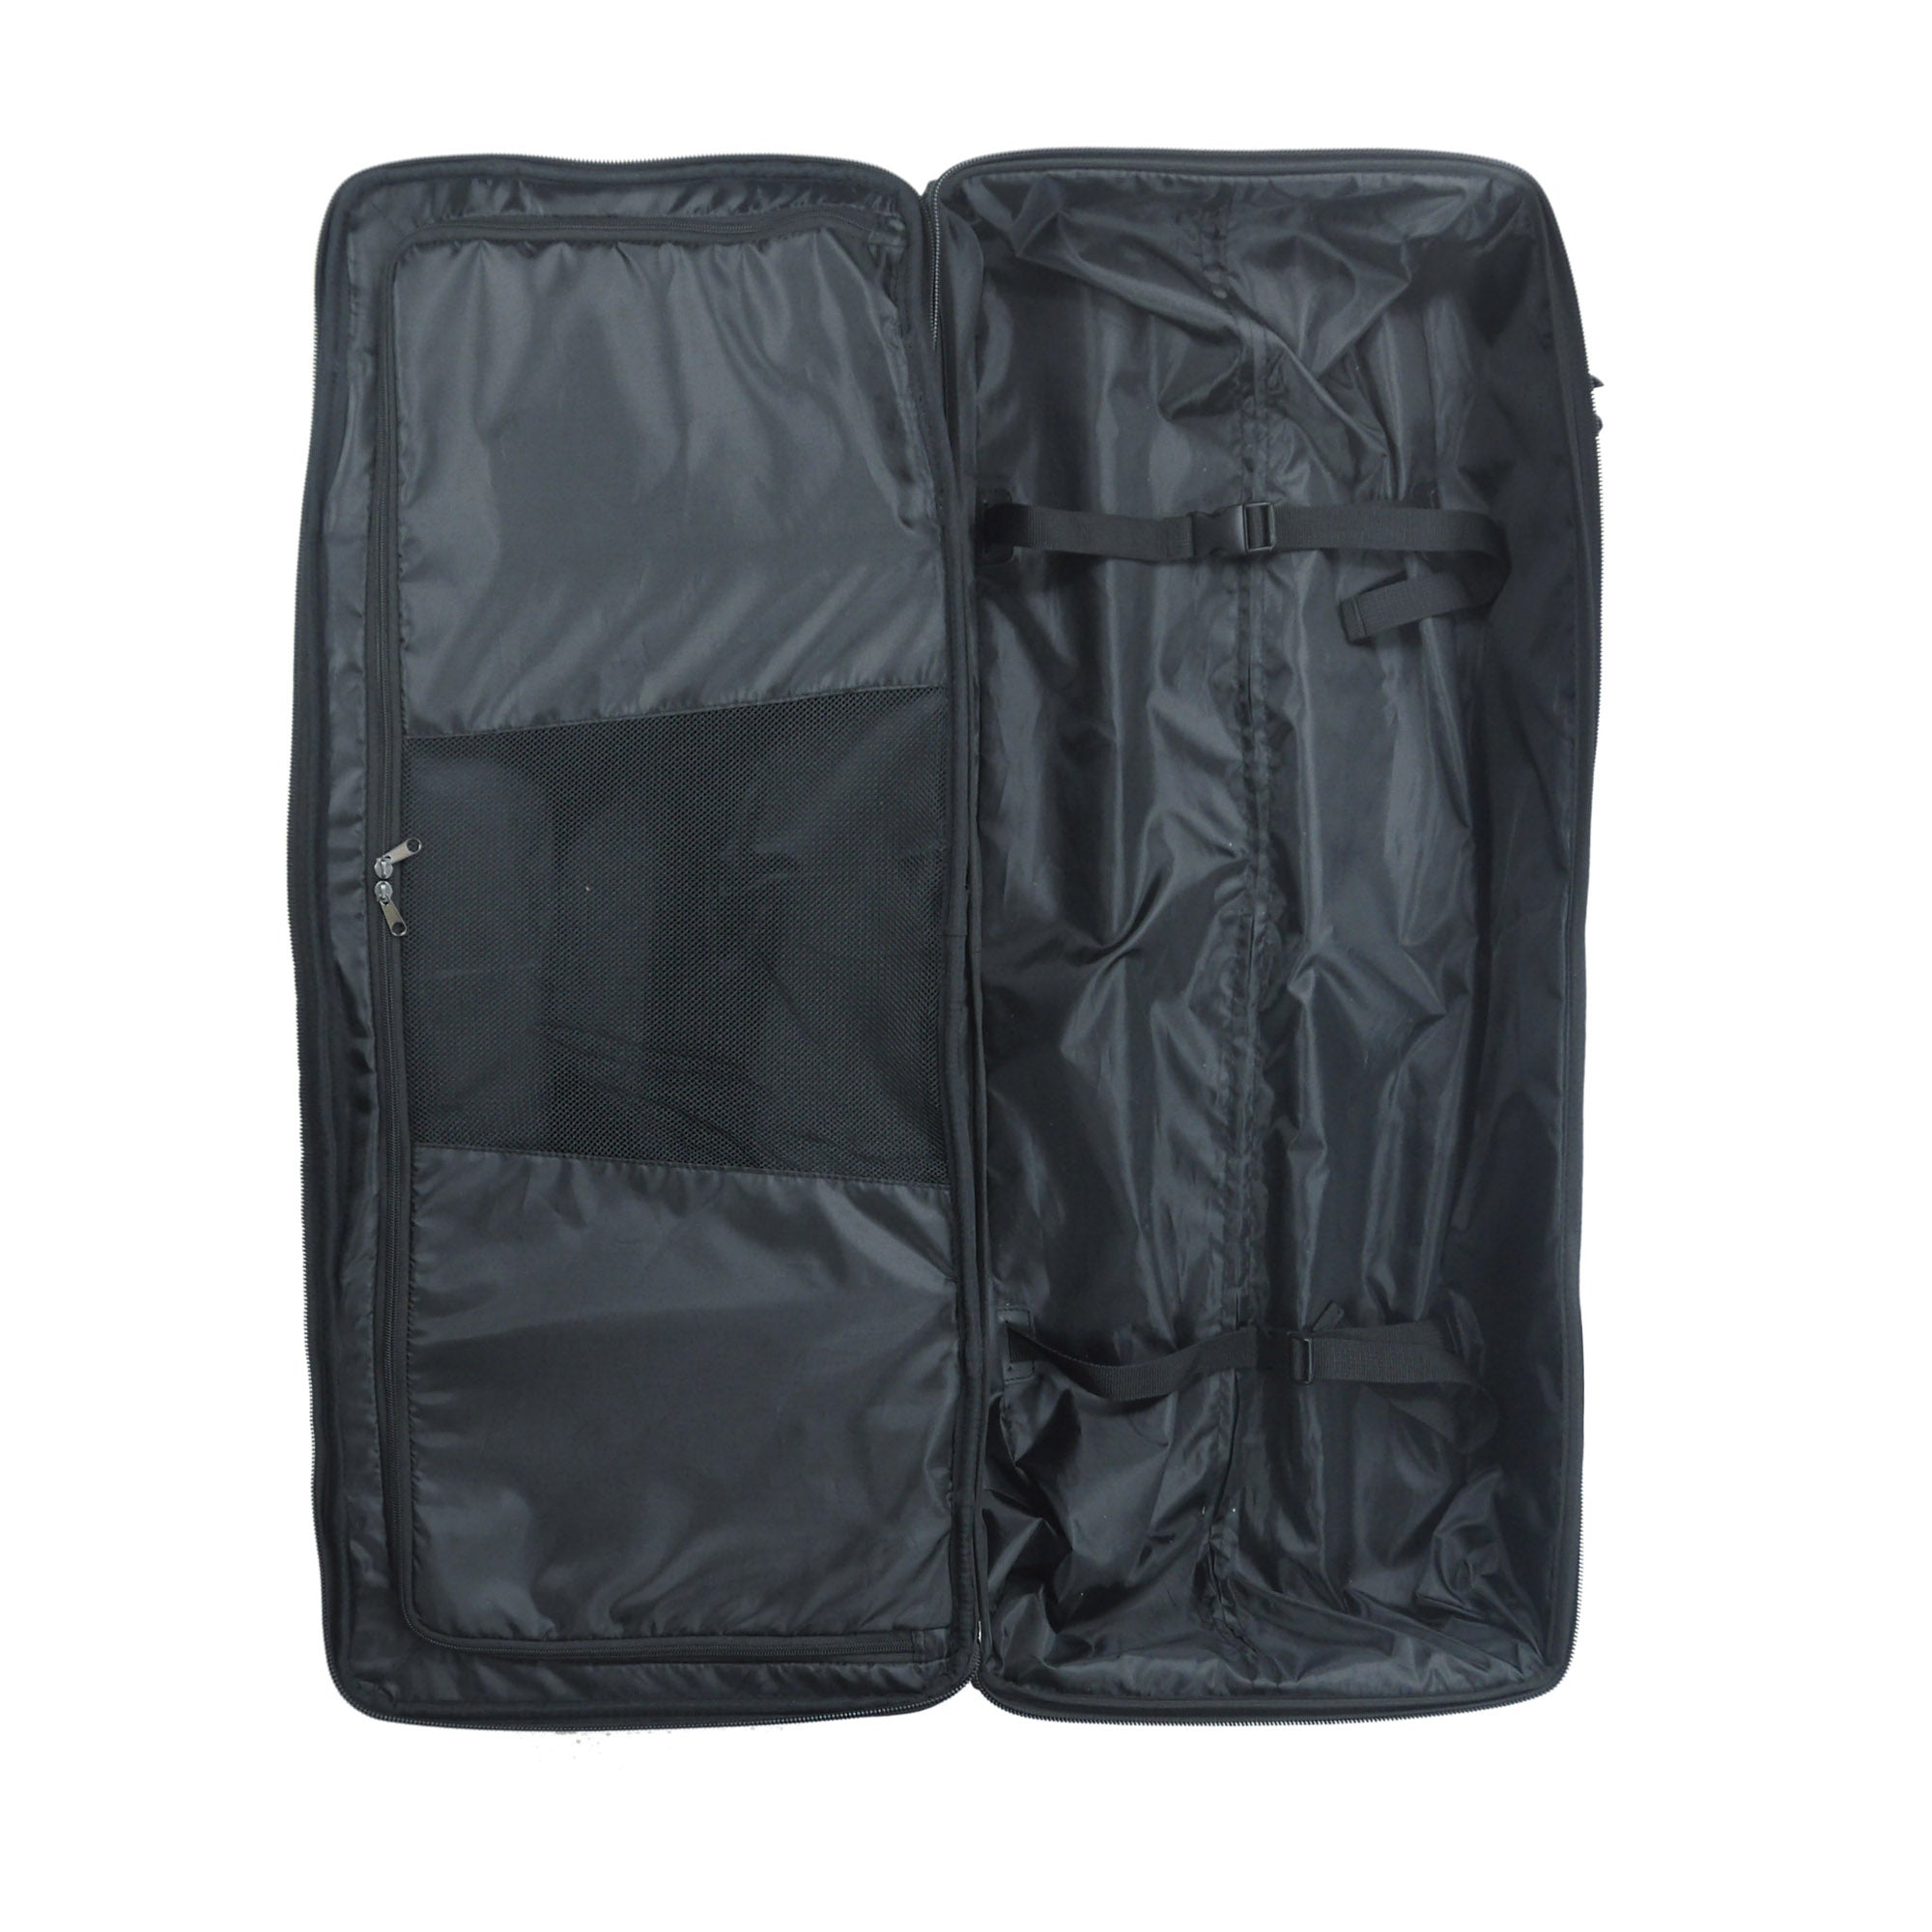 FUL Tour Manager 36" Rolling Duffel Bag